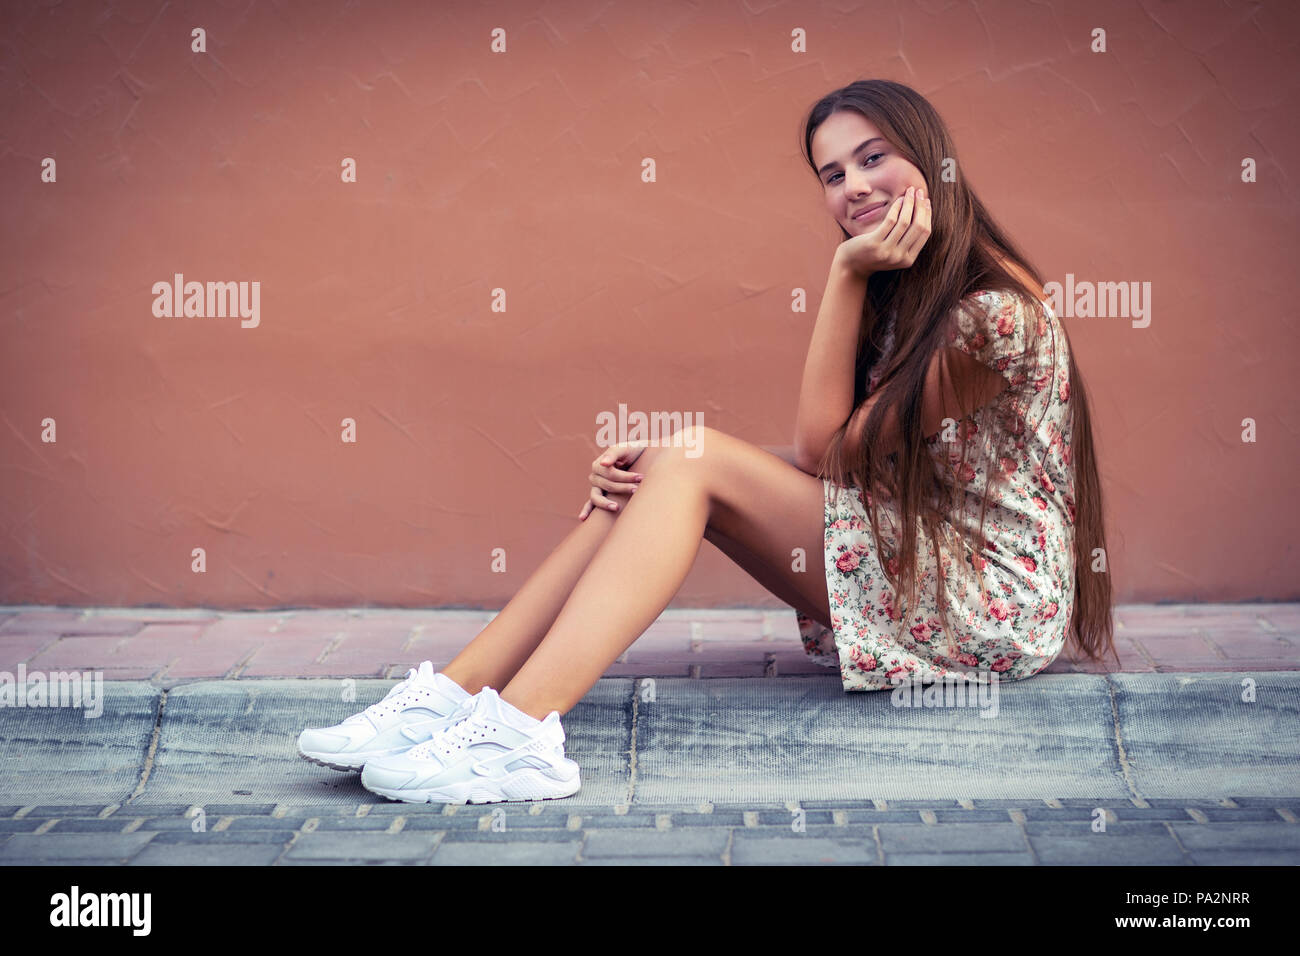 Pretty girl on the street, nice female with long natural hair sitting on blank monophonic wall background, authentic genuine beauty of young people Stock Photo